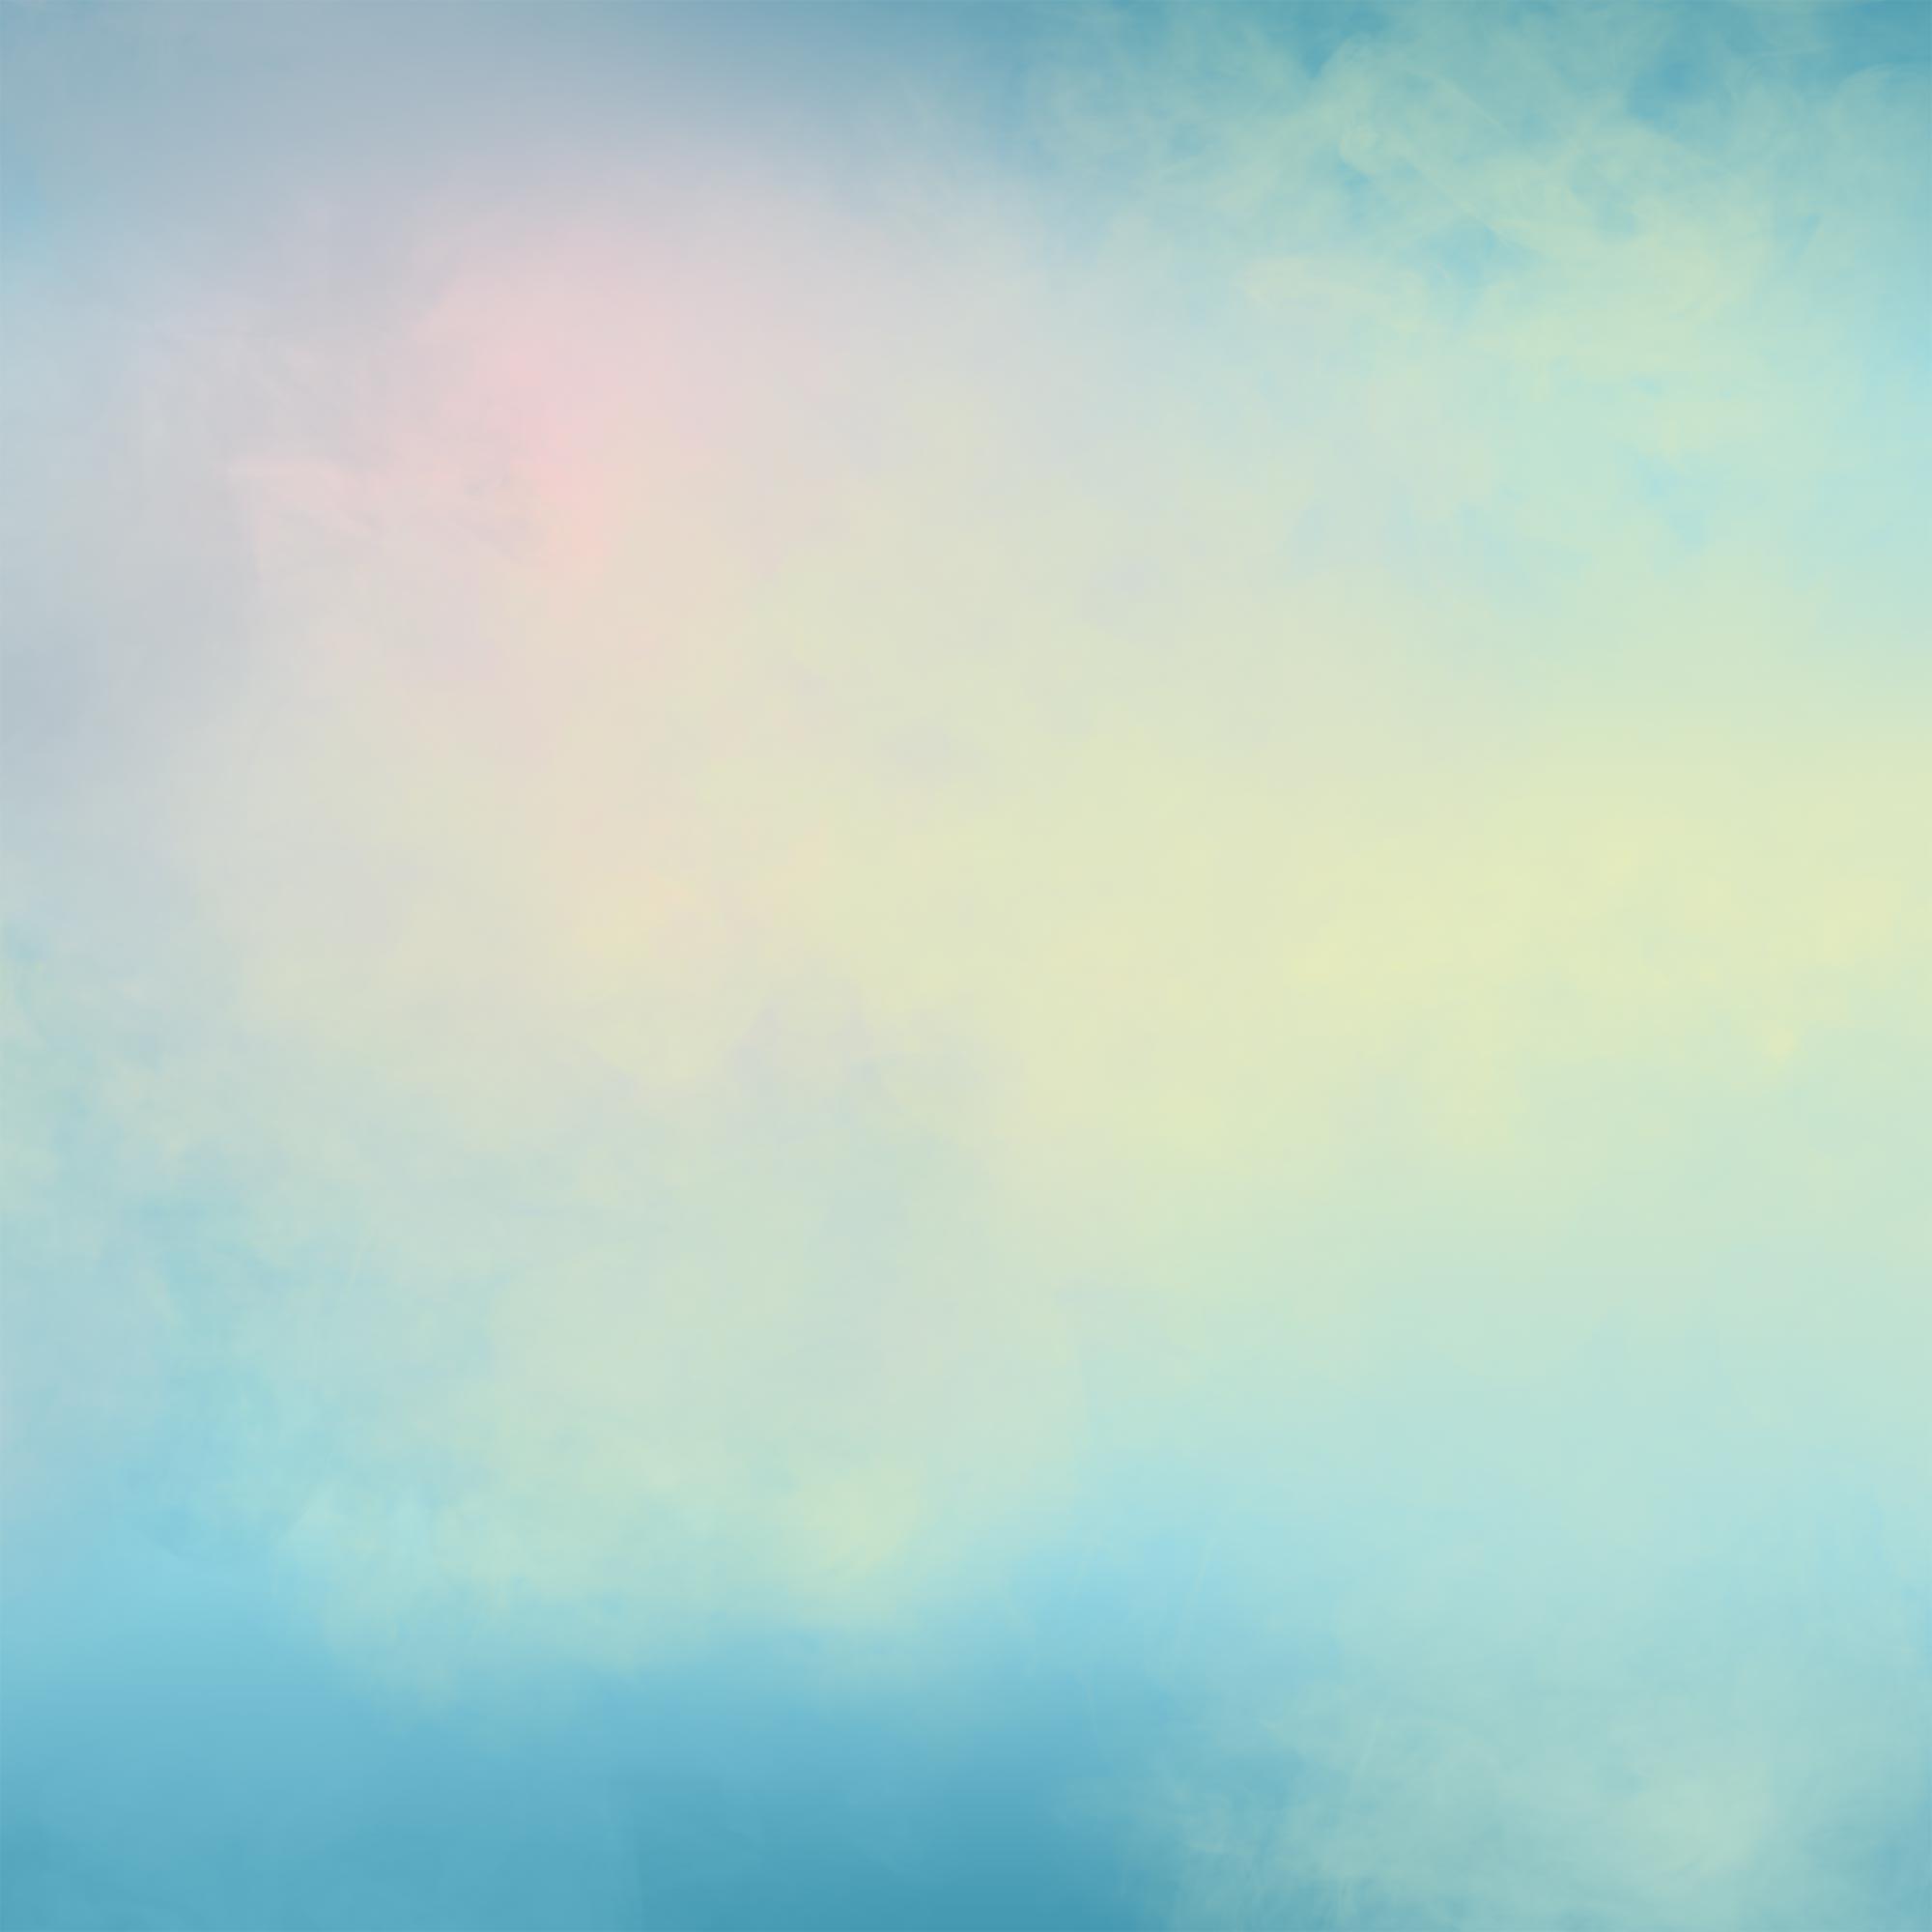 How To Make A Fantasy Background Sky Wallpaper Uploaded On